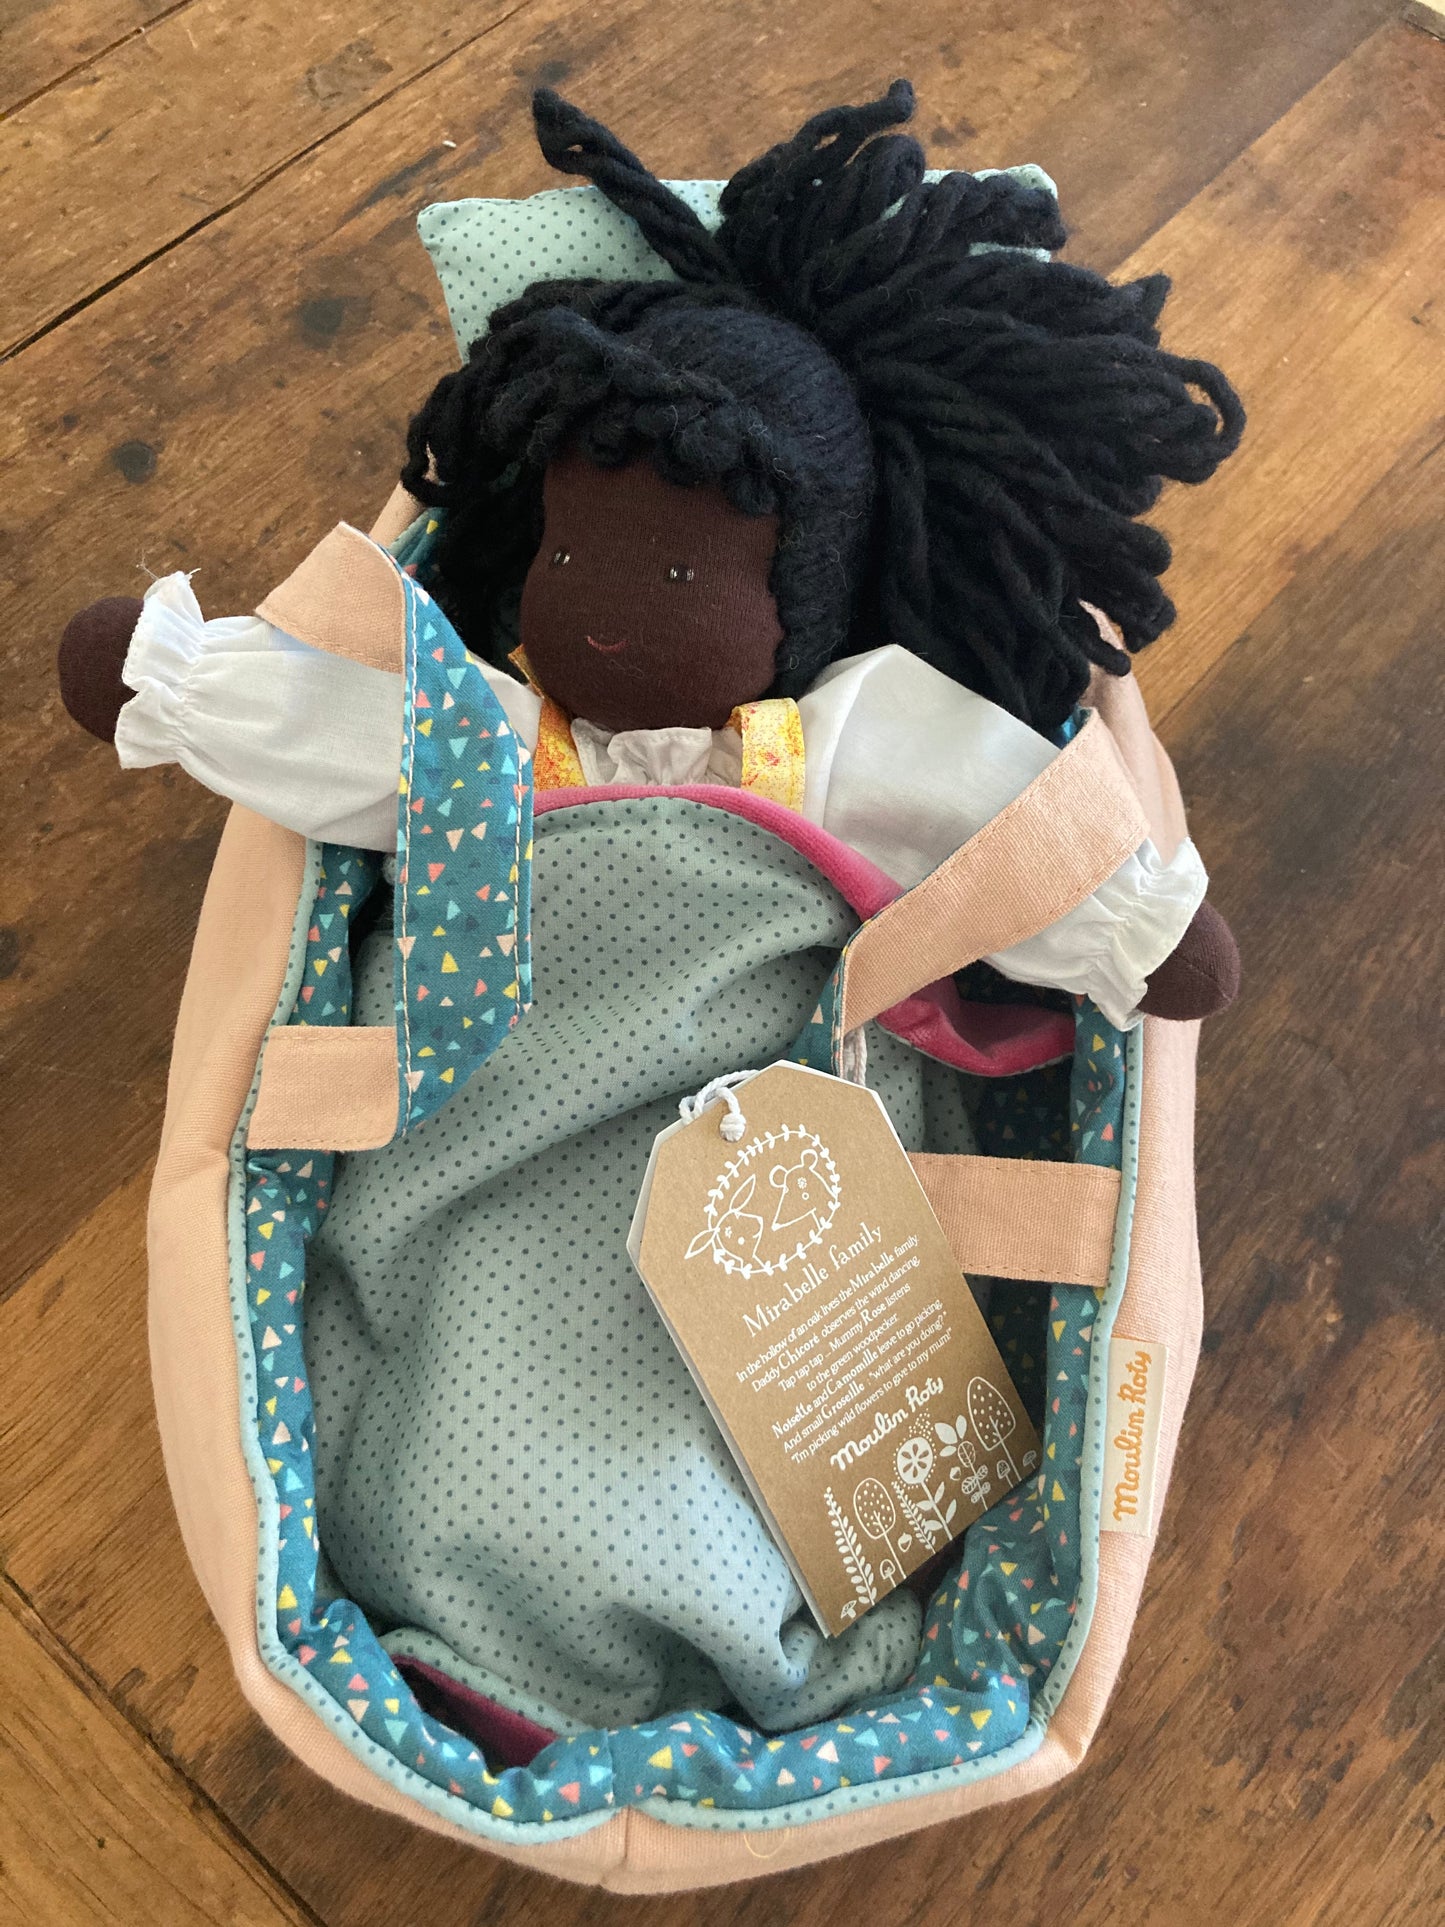 Dolls and Dollhouse Play - CARRYING COT